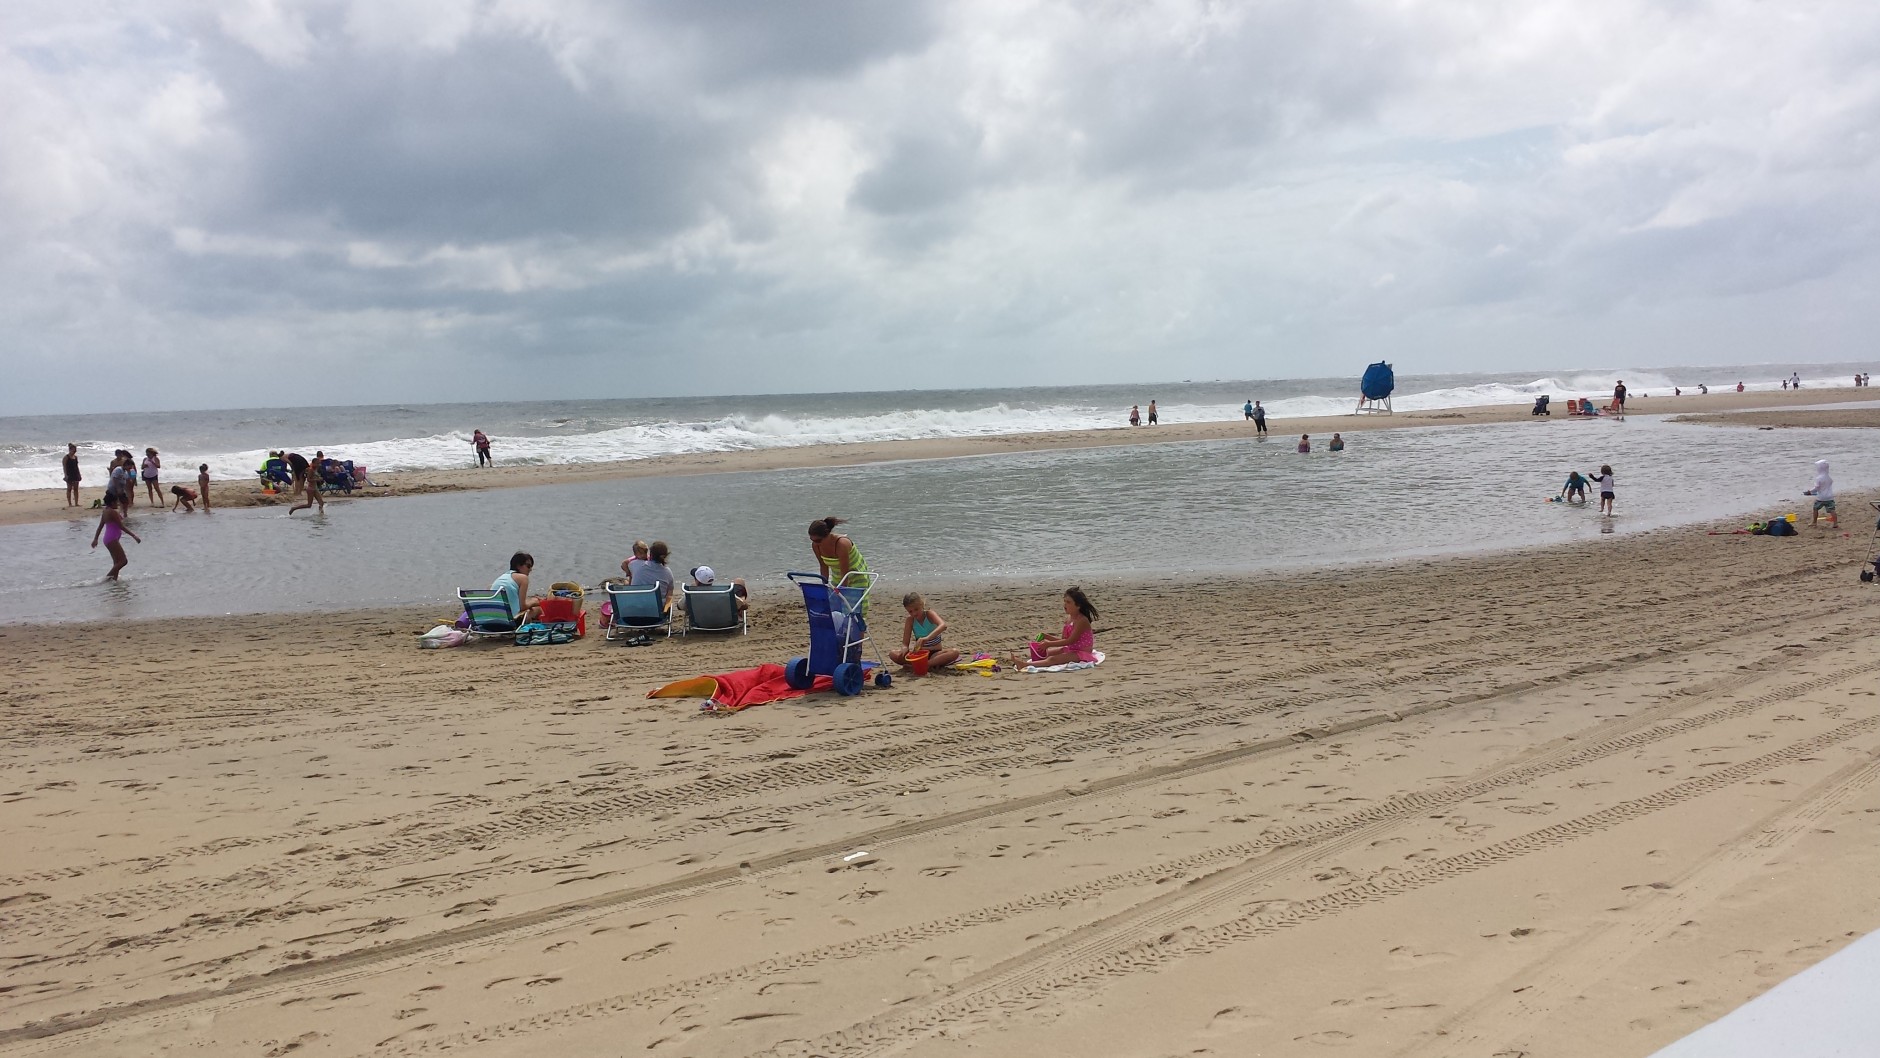 Beachgoers make due at Ocean City, Md. on Sunday, Sept. 4, 2016 as Hermine makes its way up the East Coast and farther out to sea. Ocean City officials say that despite sunny skies and calm conditions, strong rip currents and chances for beach erosion remain high. (WTOP/Colleen Kelleher)